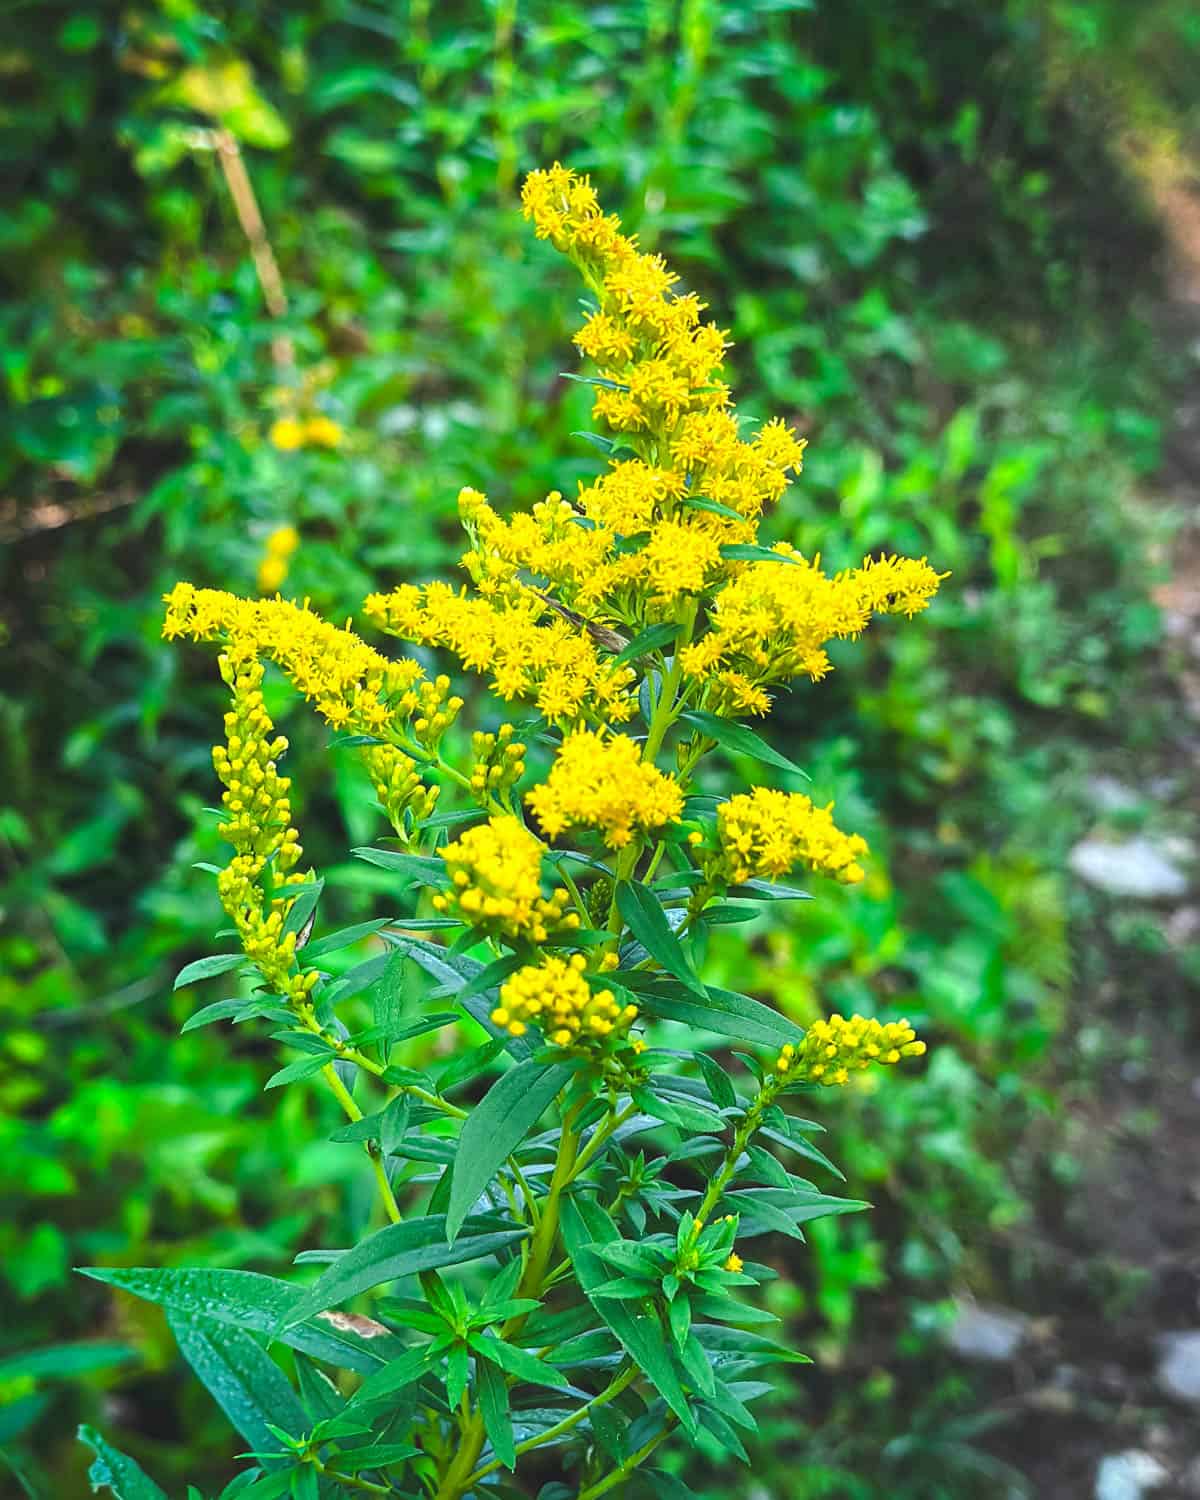 A yellow goldenrod flower bloomed showing the green stems and leaves. 